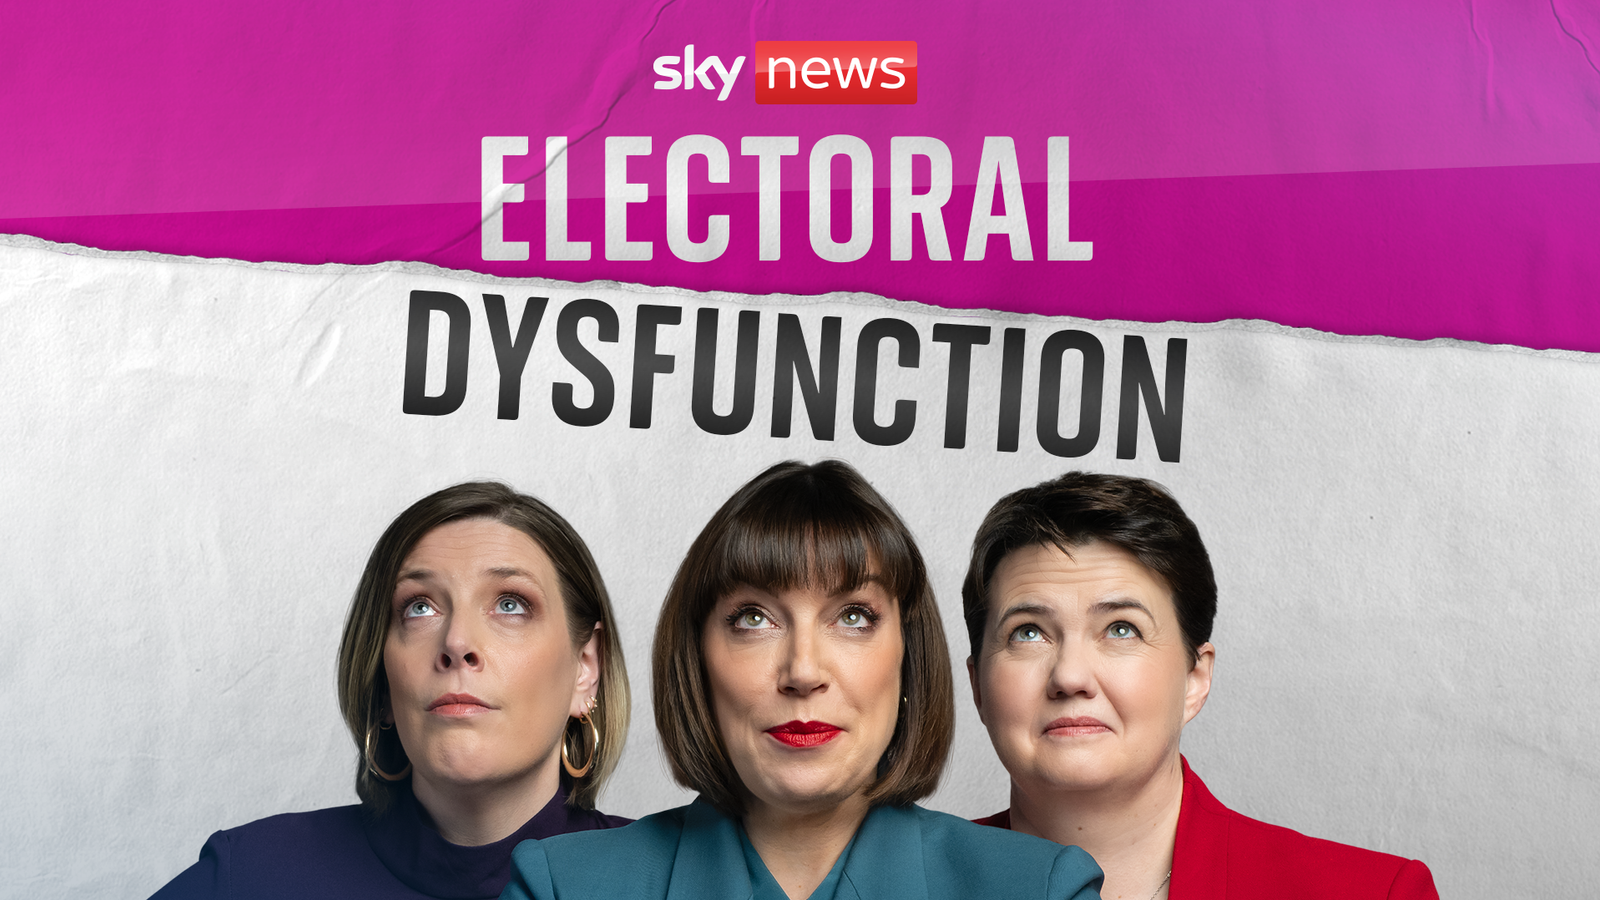 Electoral Dysfunction: Beth Rigby, Jess Phillips and Ruth Davidson team up for a new political podcast from Sky News